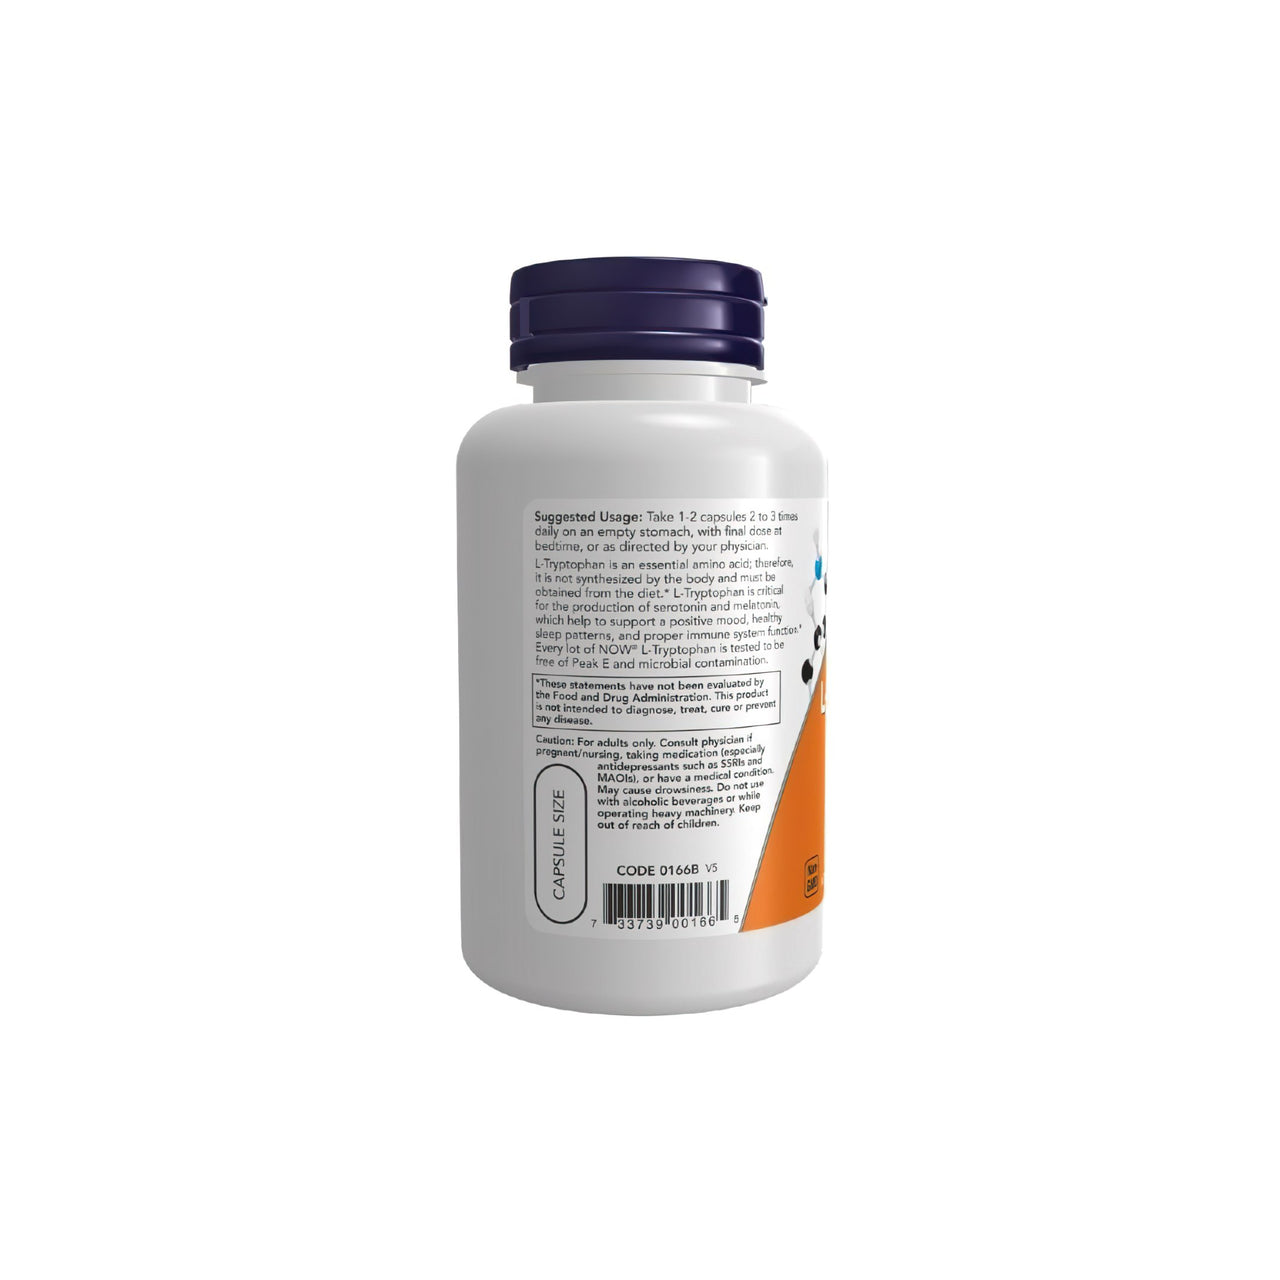 A bottle of L-Tryptophan 500 mg 60 Vegetable Capsules by Now Foods for stress reduction on a white background.